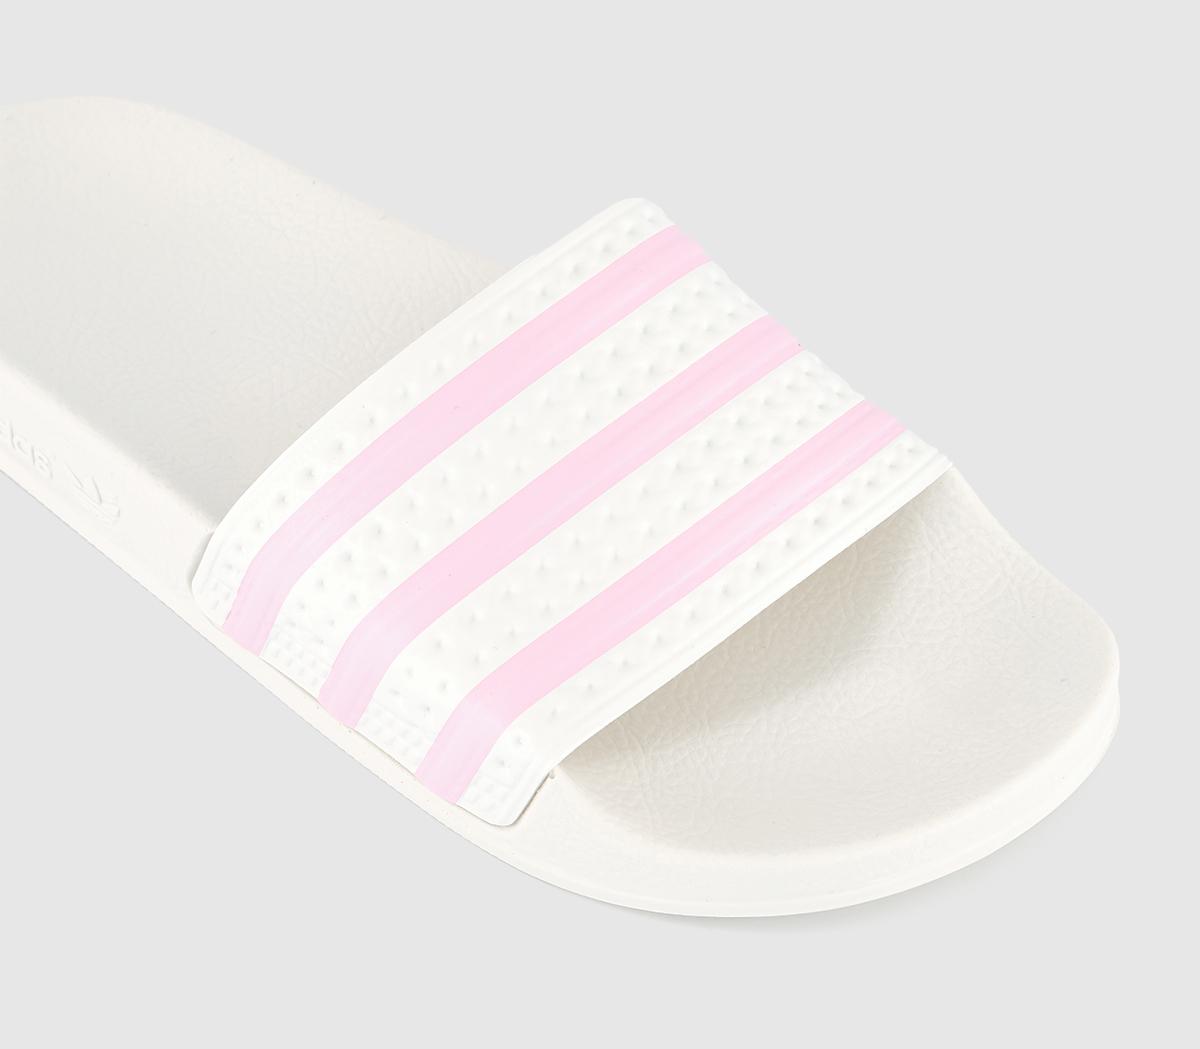 adidas Adilette Sliders Off White Clear Pink Off White - Women’s Sandals